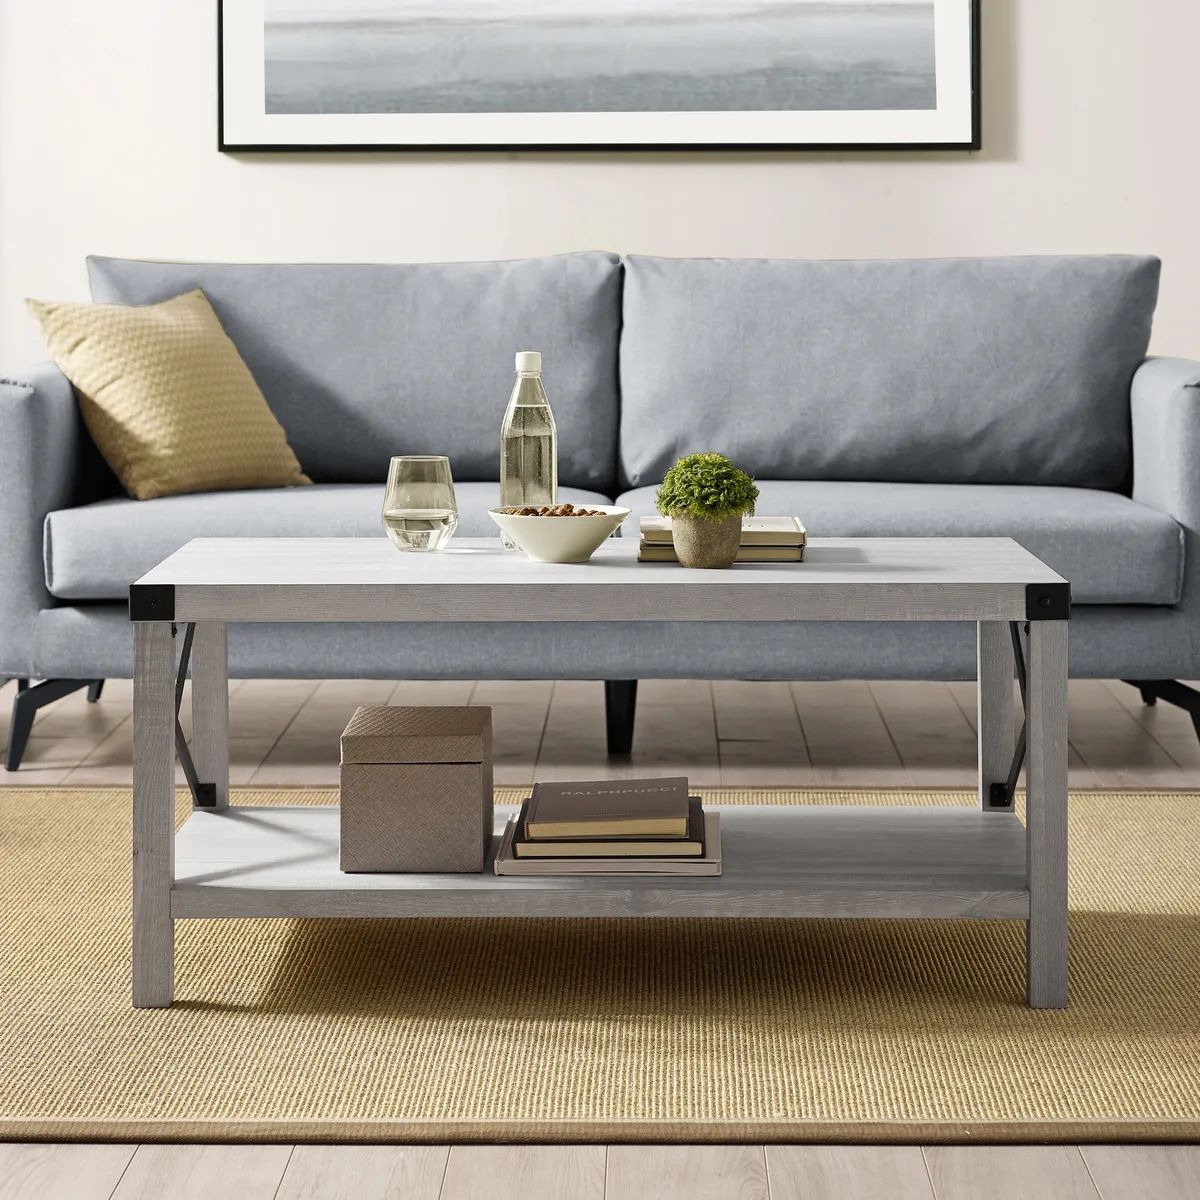 Woven Paths Magnolia Metal X Coffee Table Stone Grey Featuring Metal Accent  Usa | Ebay For Woven Paths Coffee Tables (Photo 13 of 15)